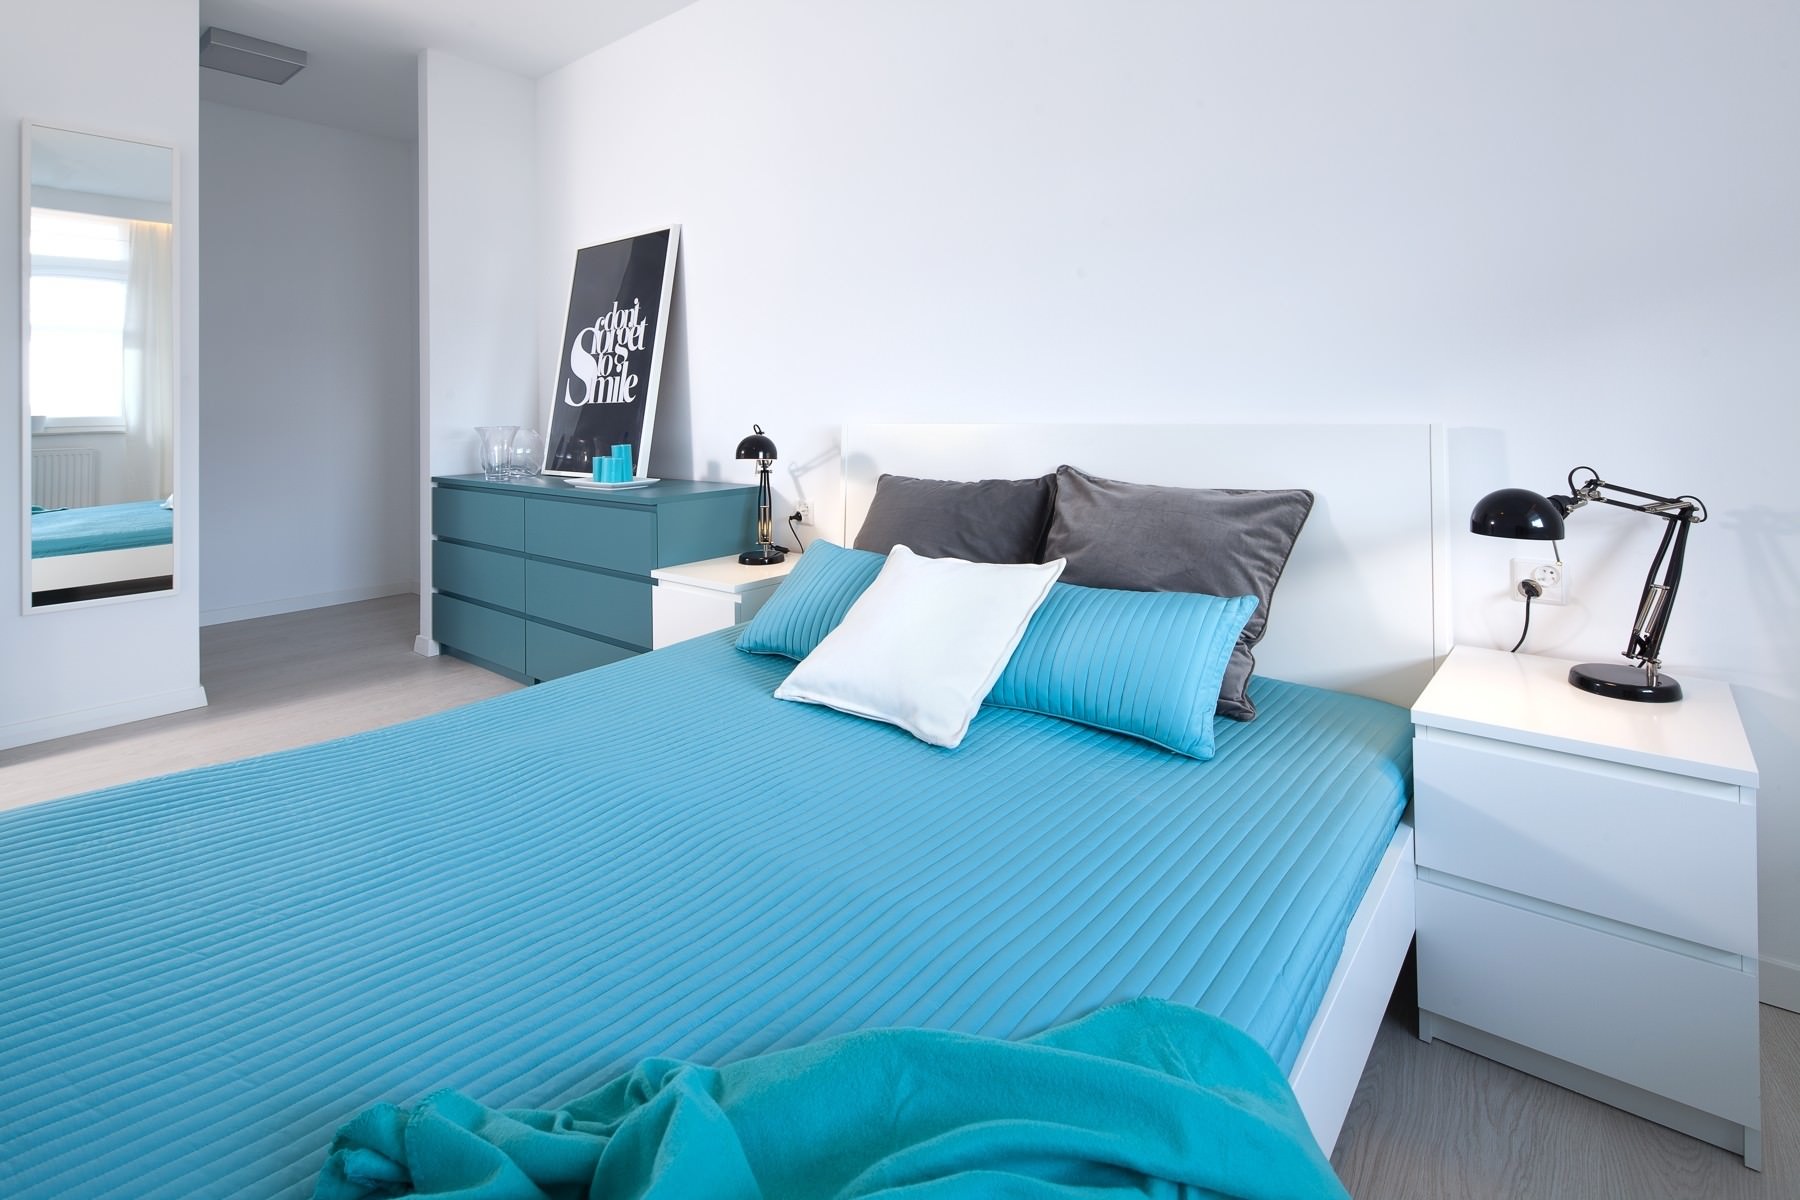 the option of using bright blue in the design of the room